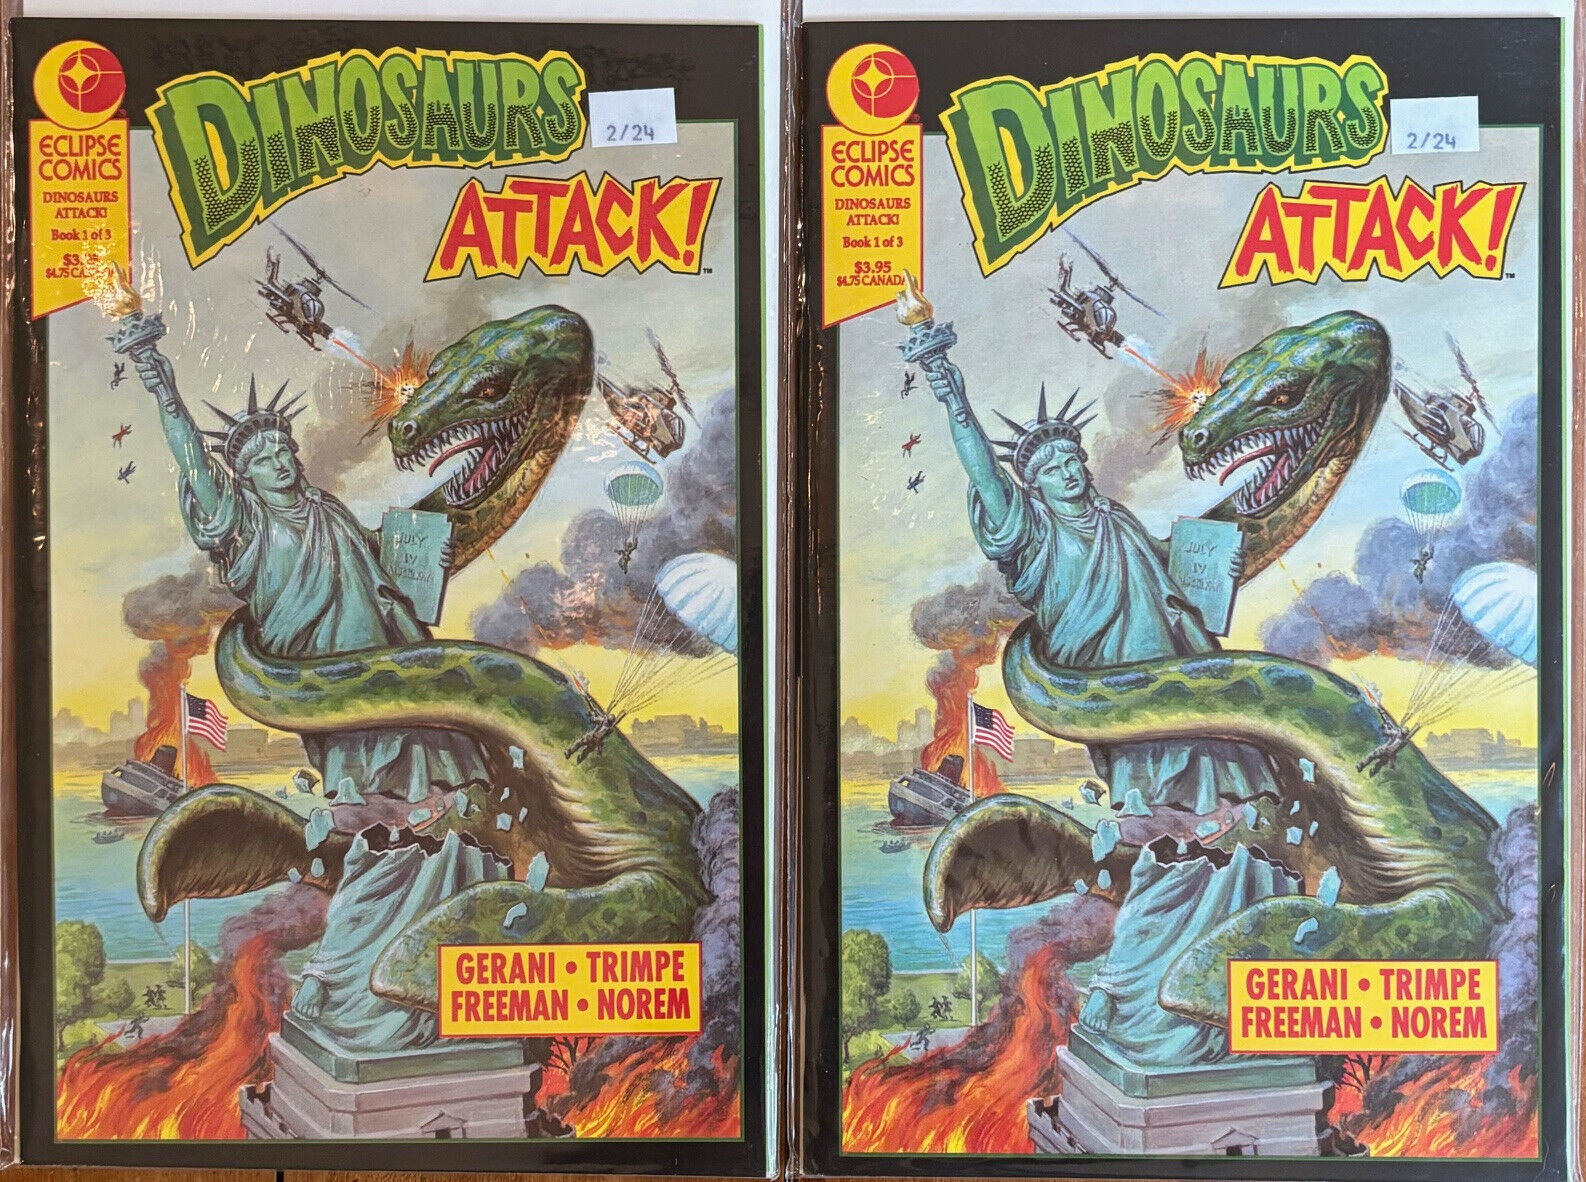 DINOSAURS ATTACK, ECLIPSE COMICS, 1991,  #1  QTY: 2 TOTAL, VERY GOOD